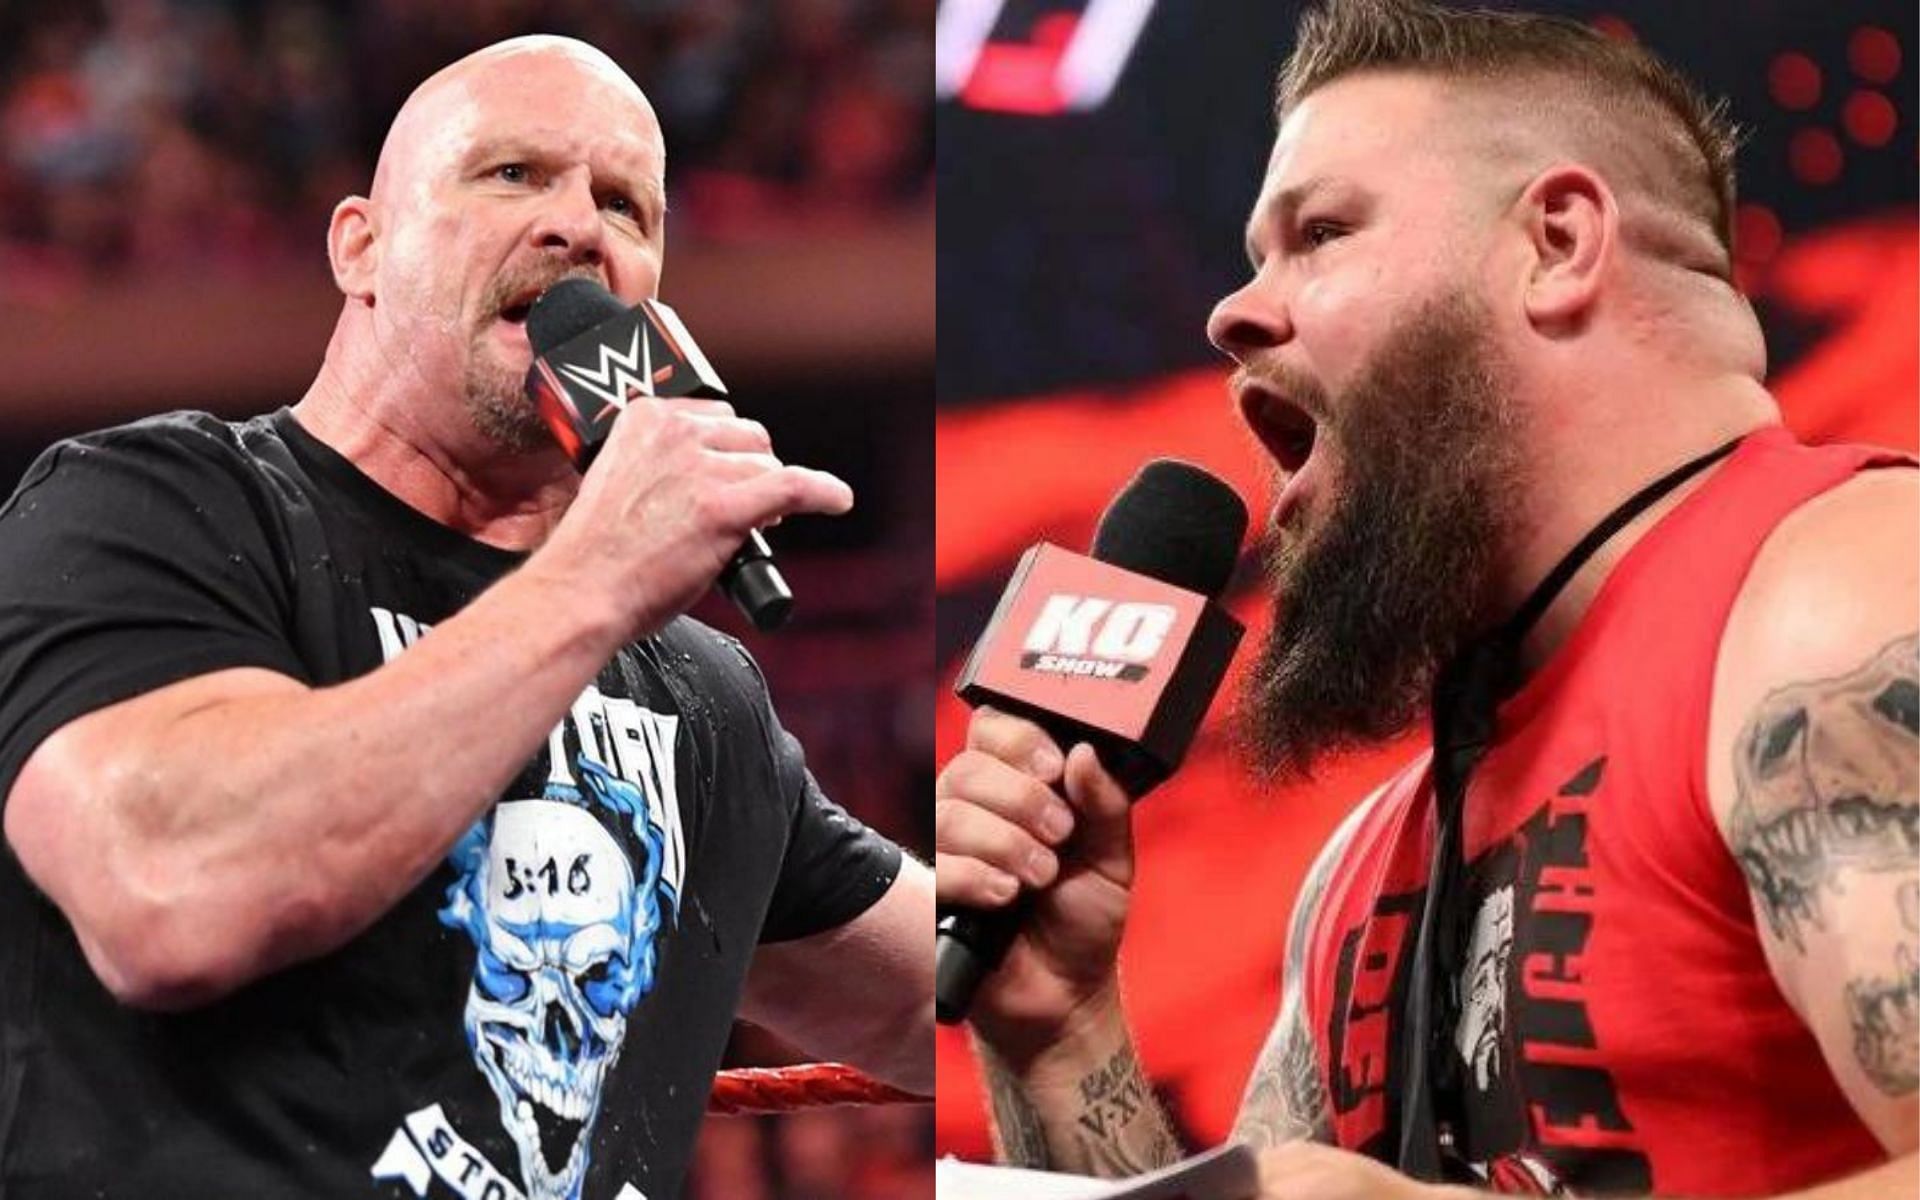 The Rattlesnake and Kevin Owens will confront each other in the ring at WrestleMania 38 on the KO Show.